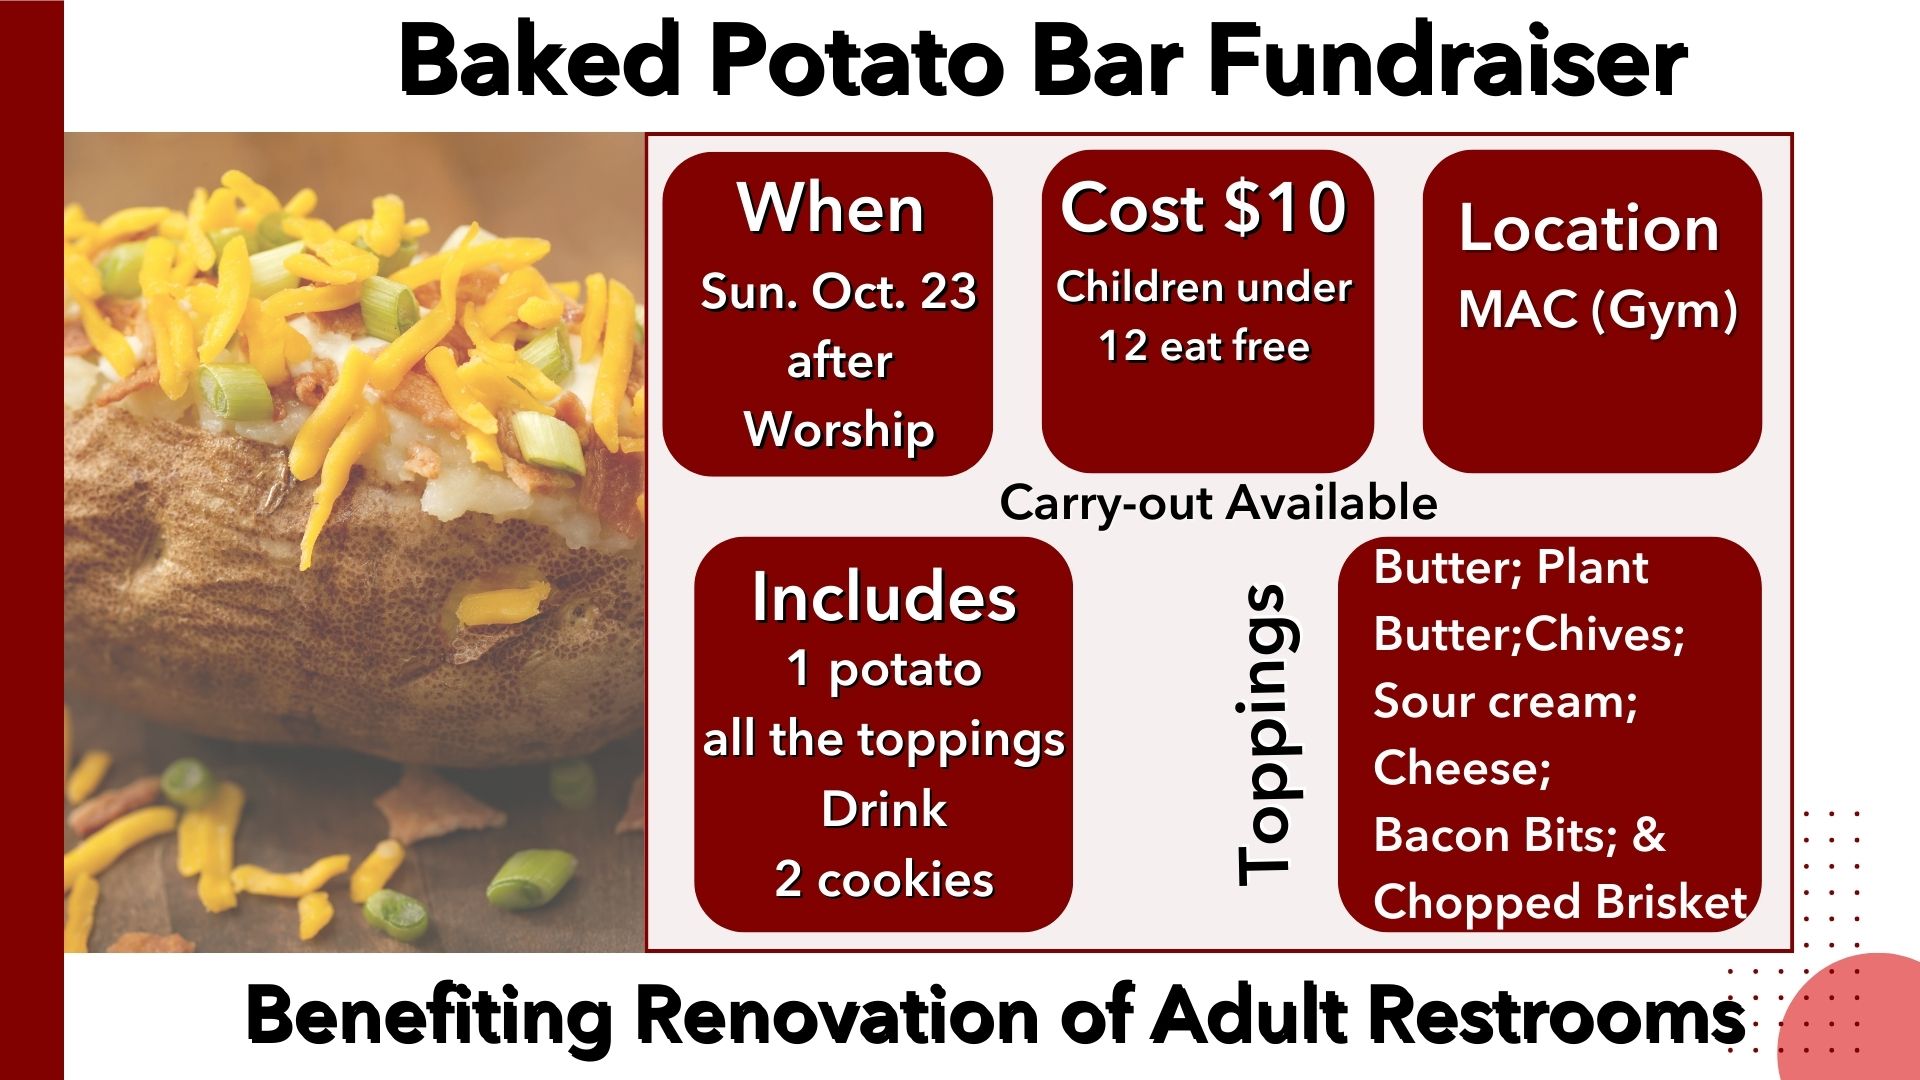 Featured image for “Baked Potato Bar Fundraiser”